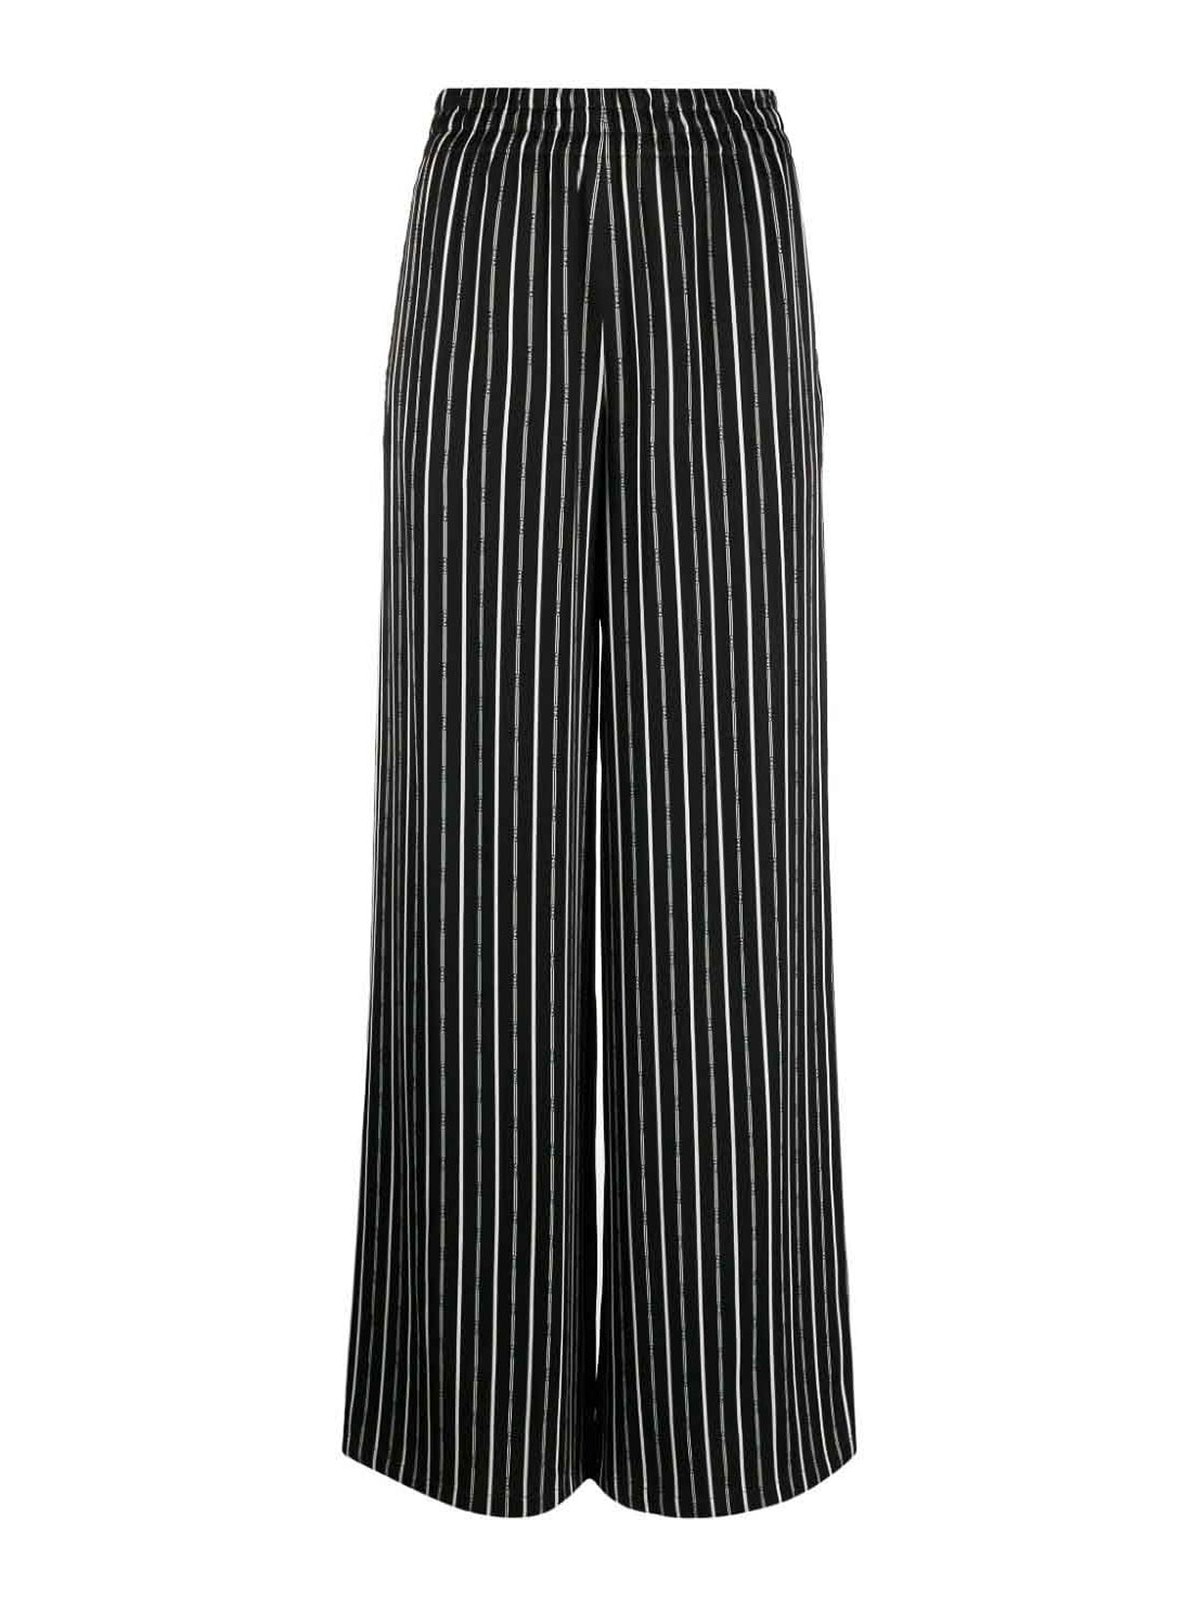 Alessio pinstriped trousers